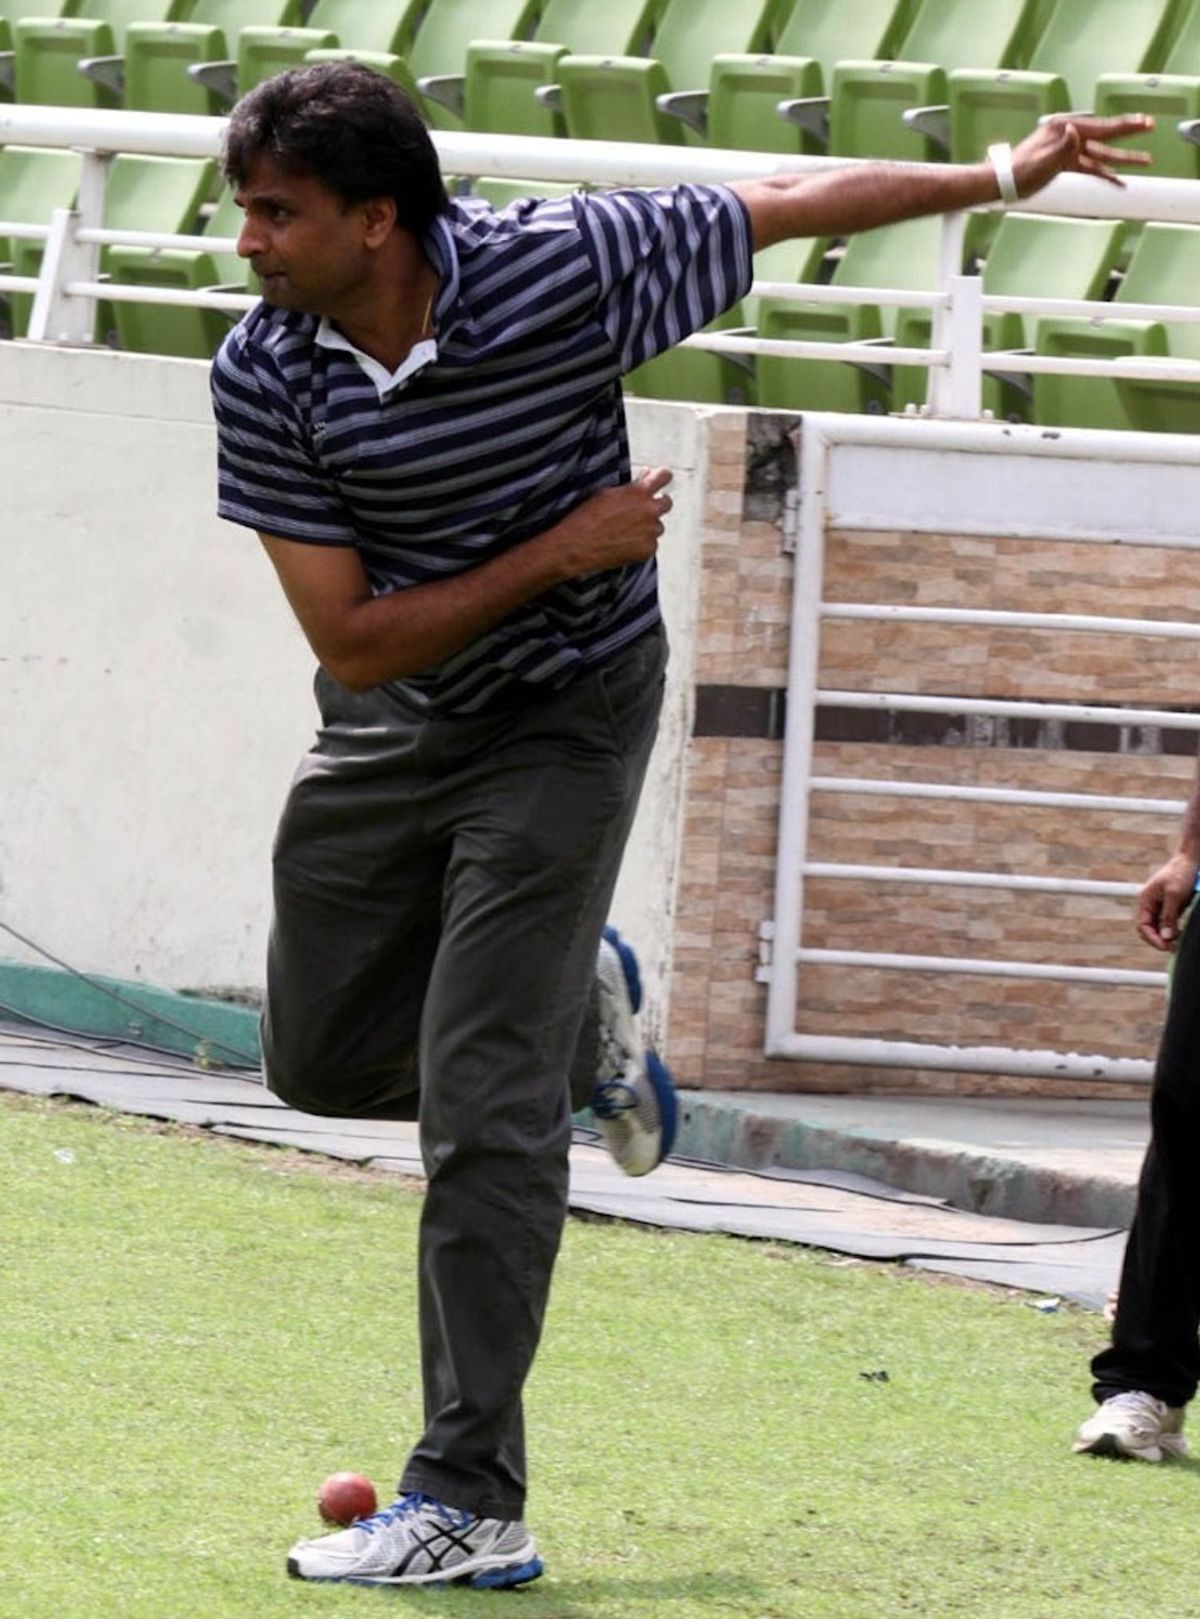 Javagal Srinath bowls to Tamim Iqbal in the nets, Mirpur, October 20, 2013